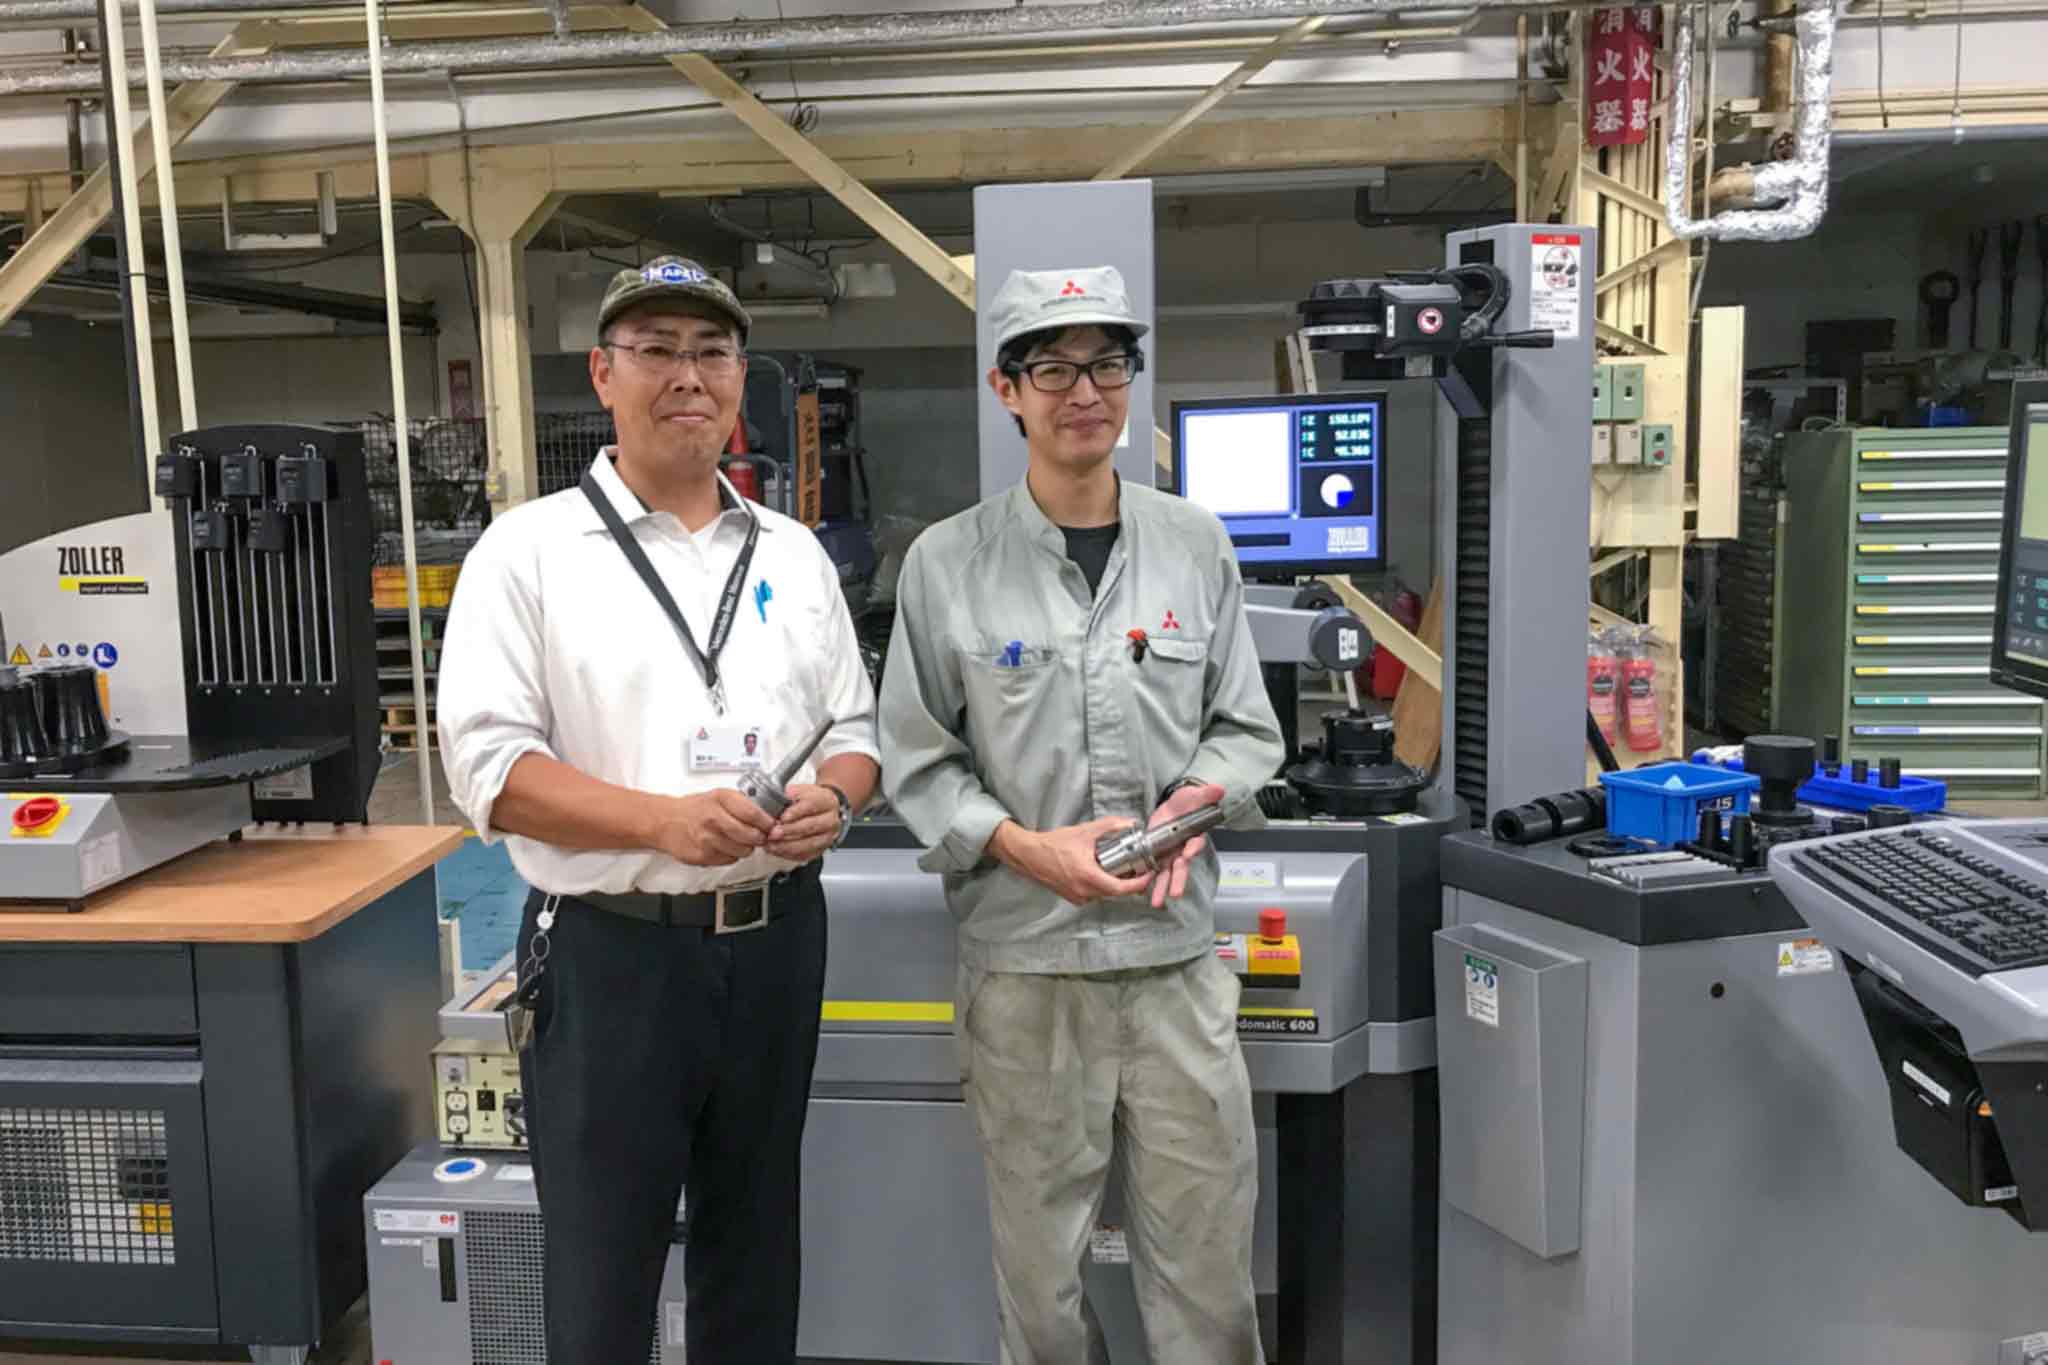 Naoto Katayama and Koichi Fukui are in the manufacturing area. Both hold a shrink chuck in their hands.